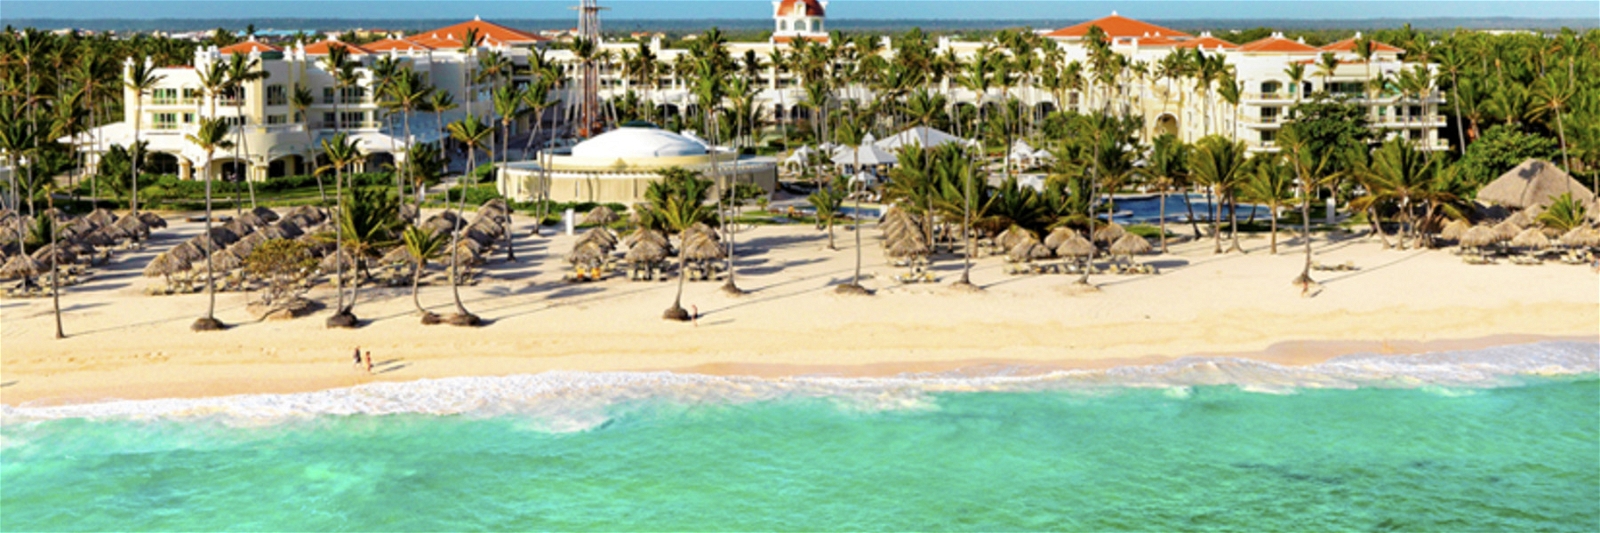 Golf Vacation Package - Iberostar Grand Bavaro - Luxury All-Inclusive + Great Golf from $443 per day!